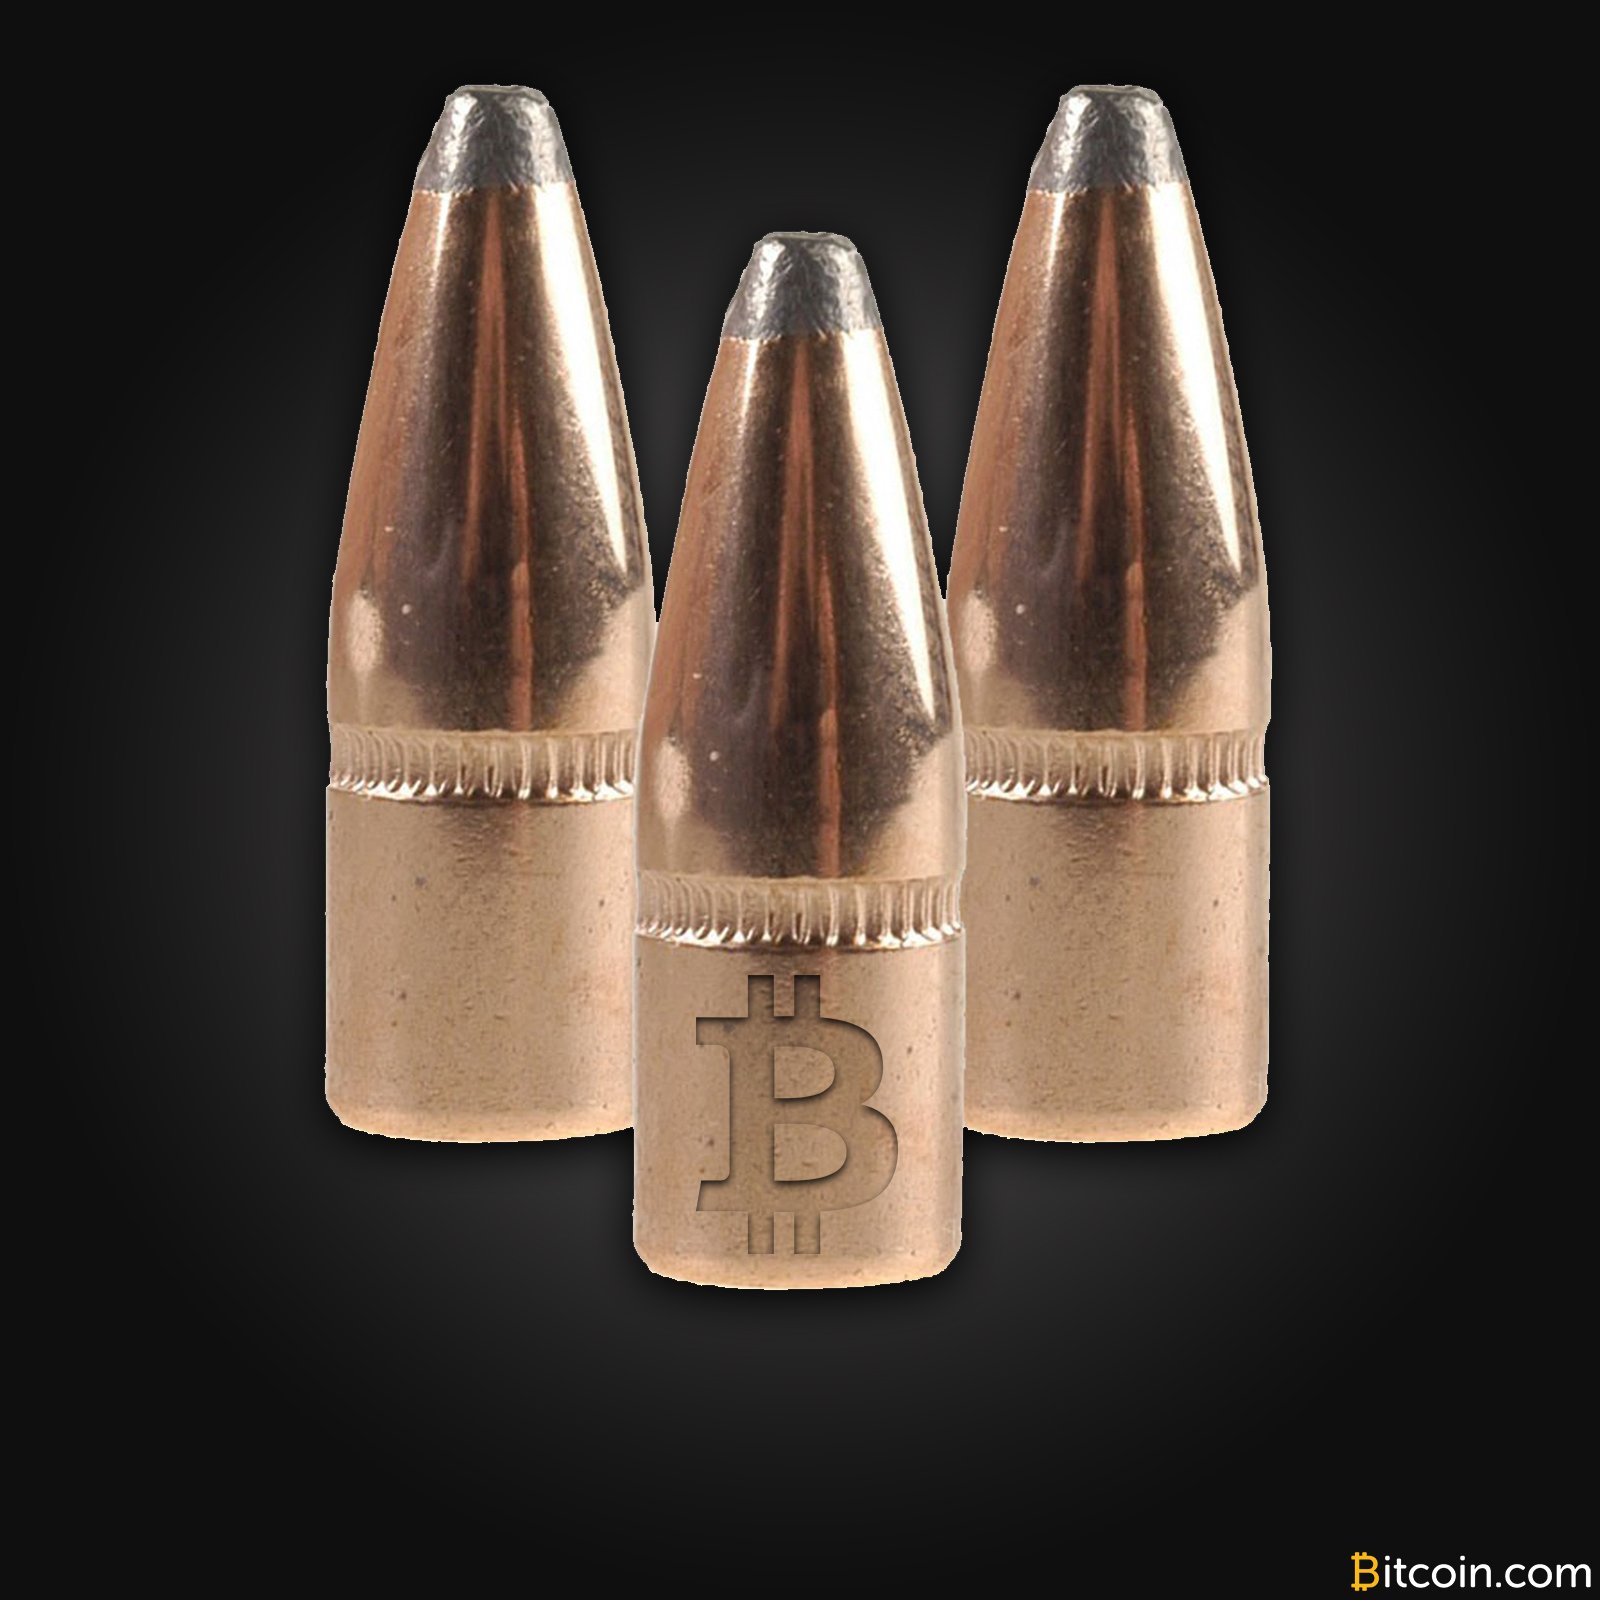 Stanford's Applied Cryptography Group Aims to Bulletproof Bitcoin